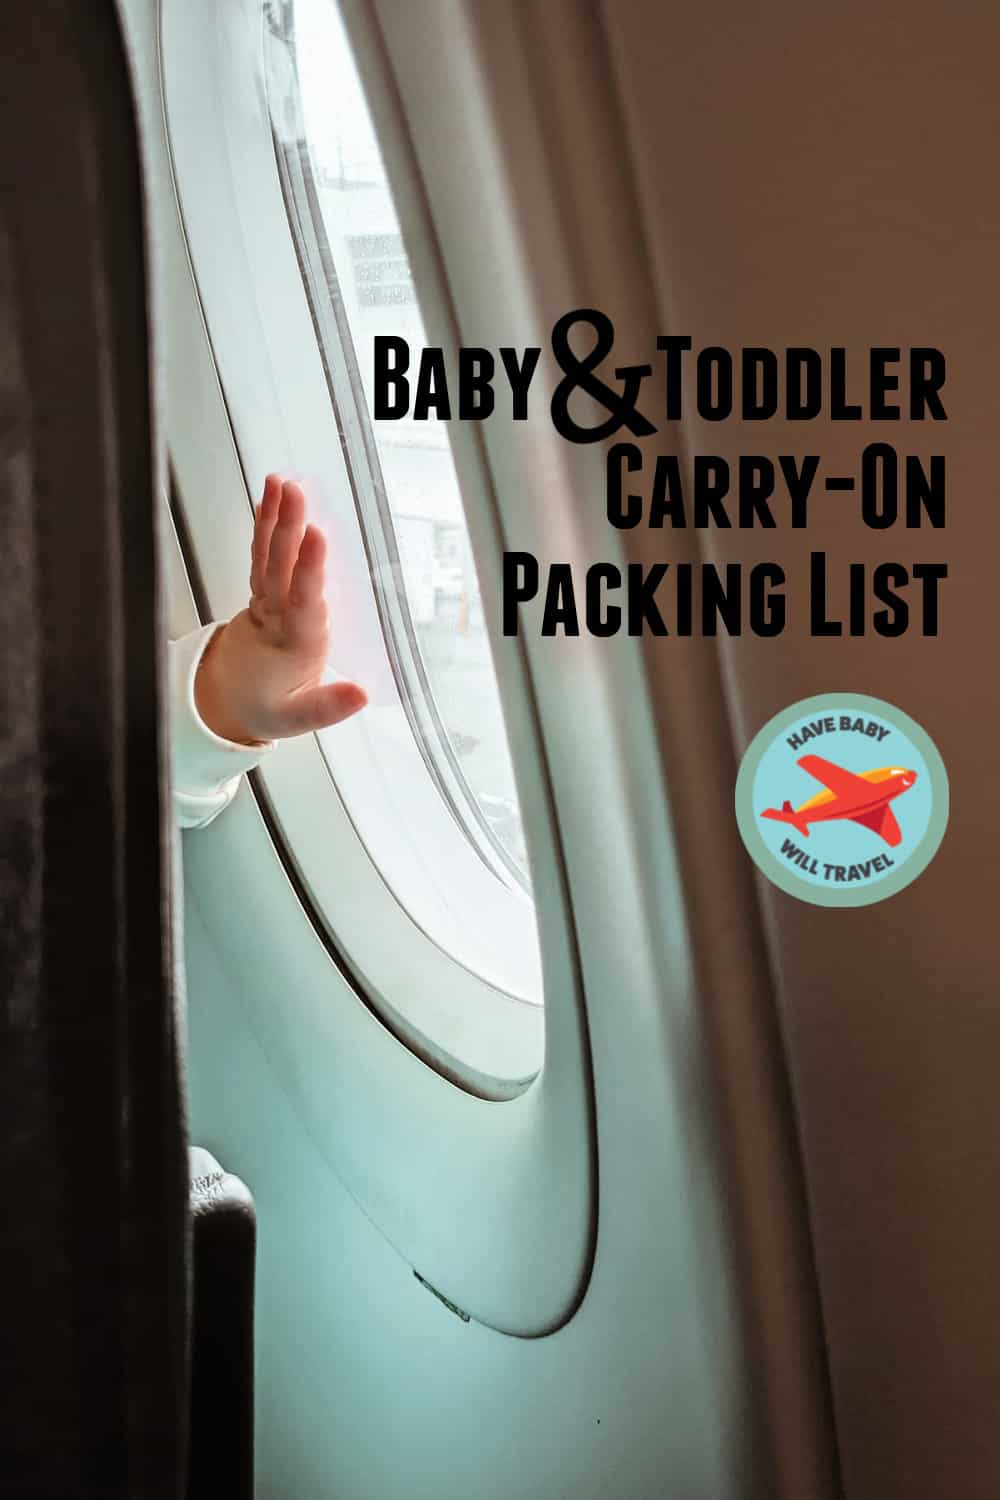 The 16 Best Travel Diaper Bags of 2023 - Third Row Adventures